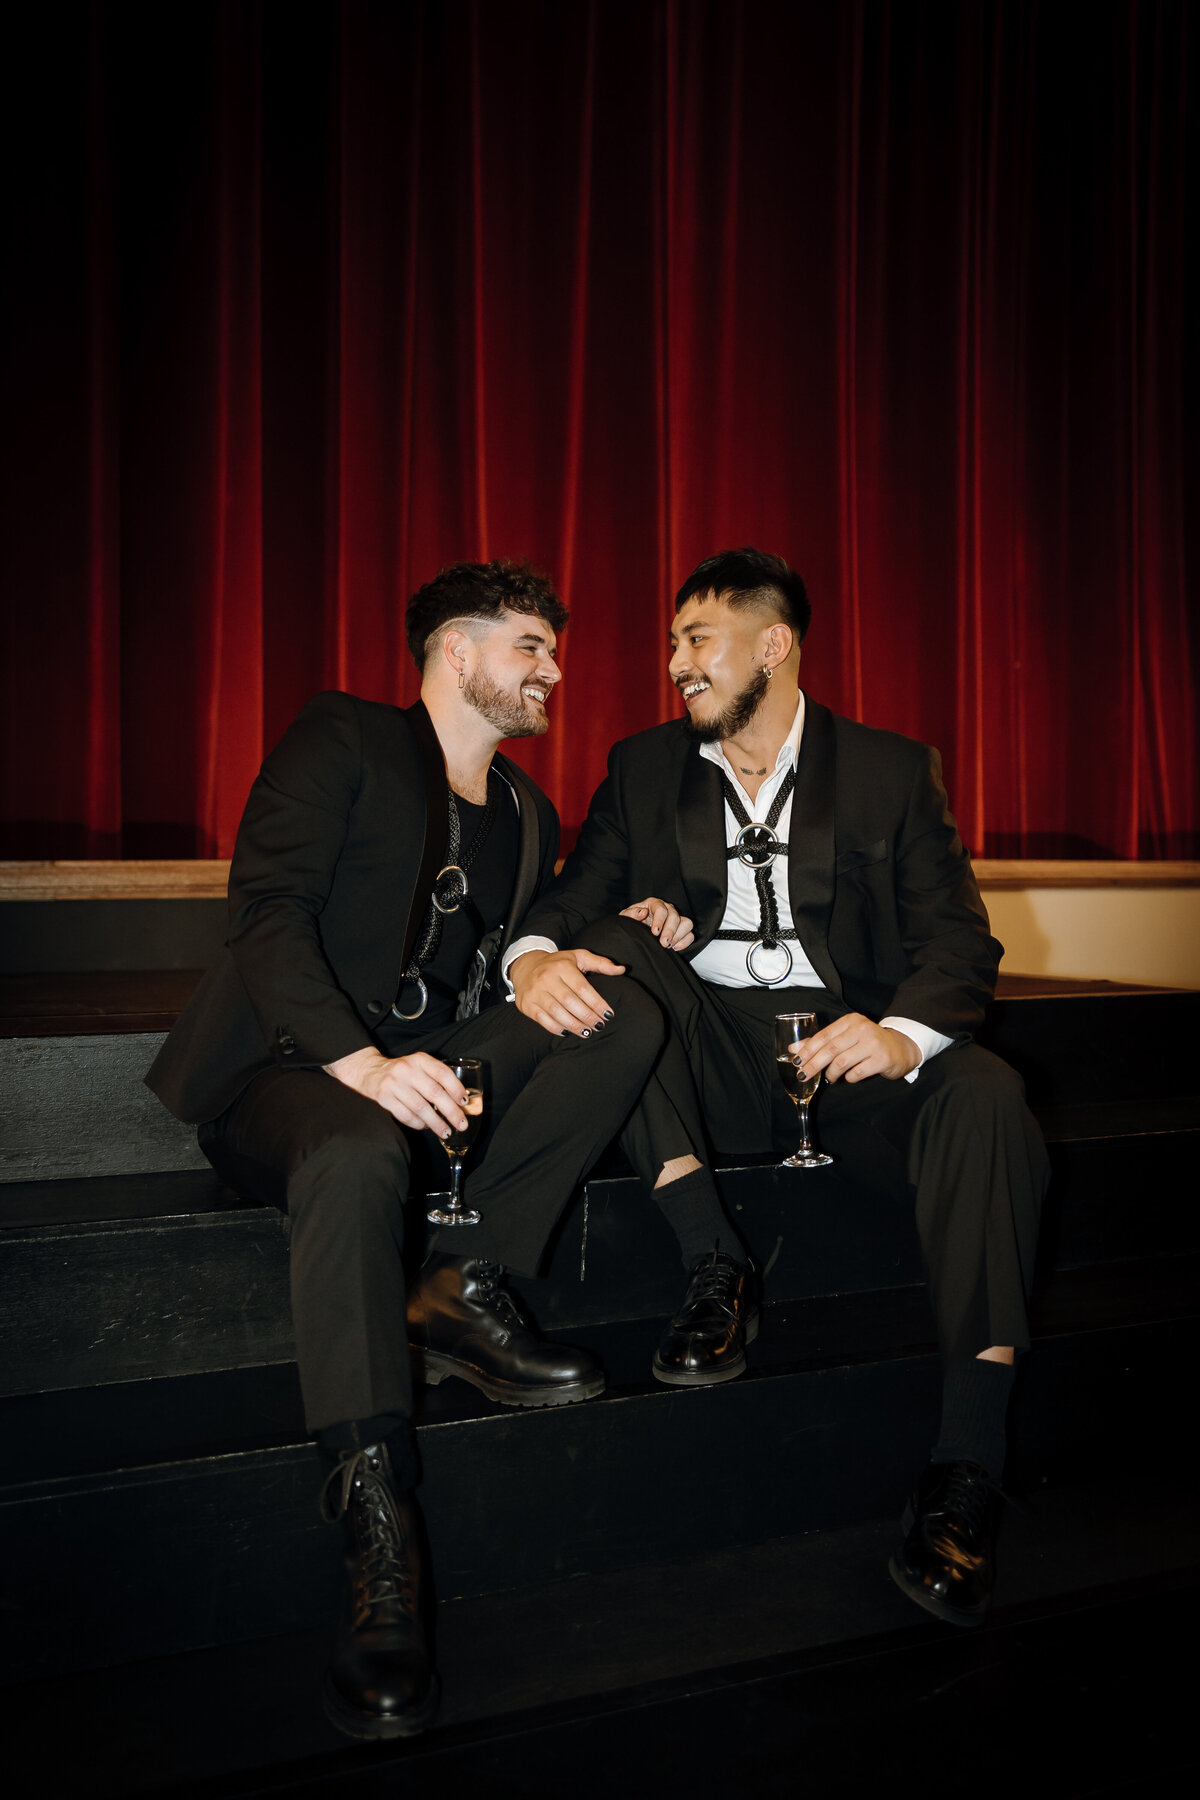 2 men in black coats smile at each other sitting on the steps of the stage.